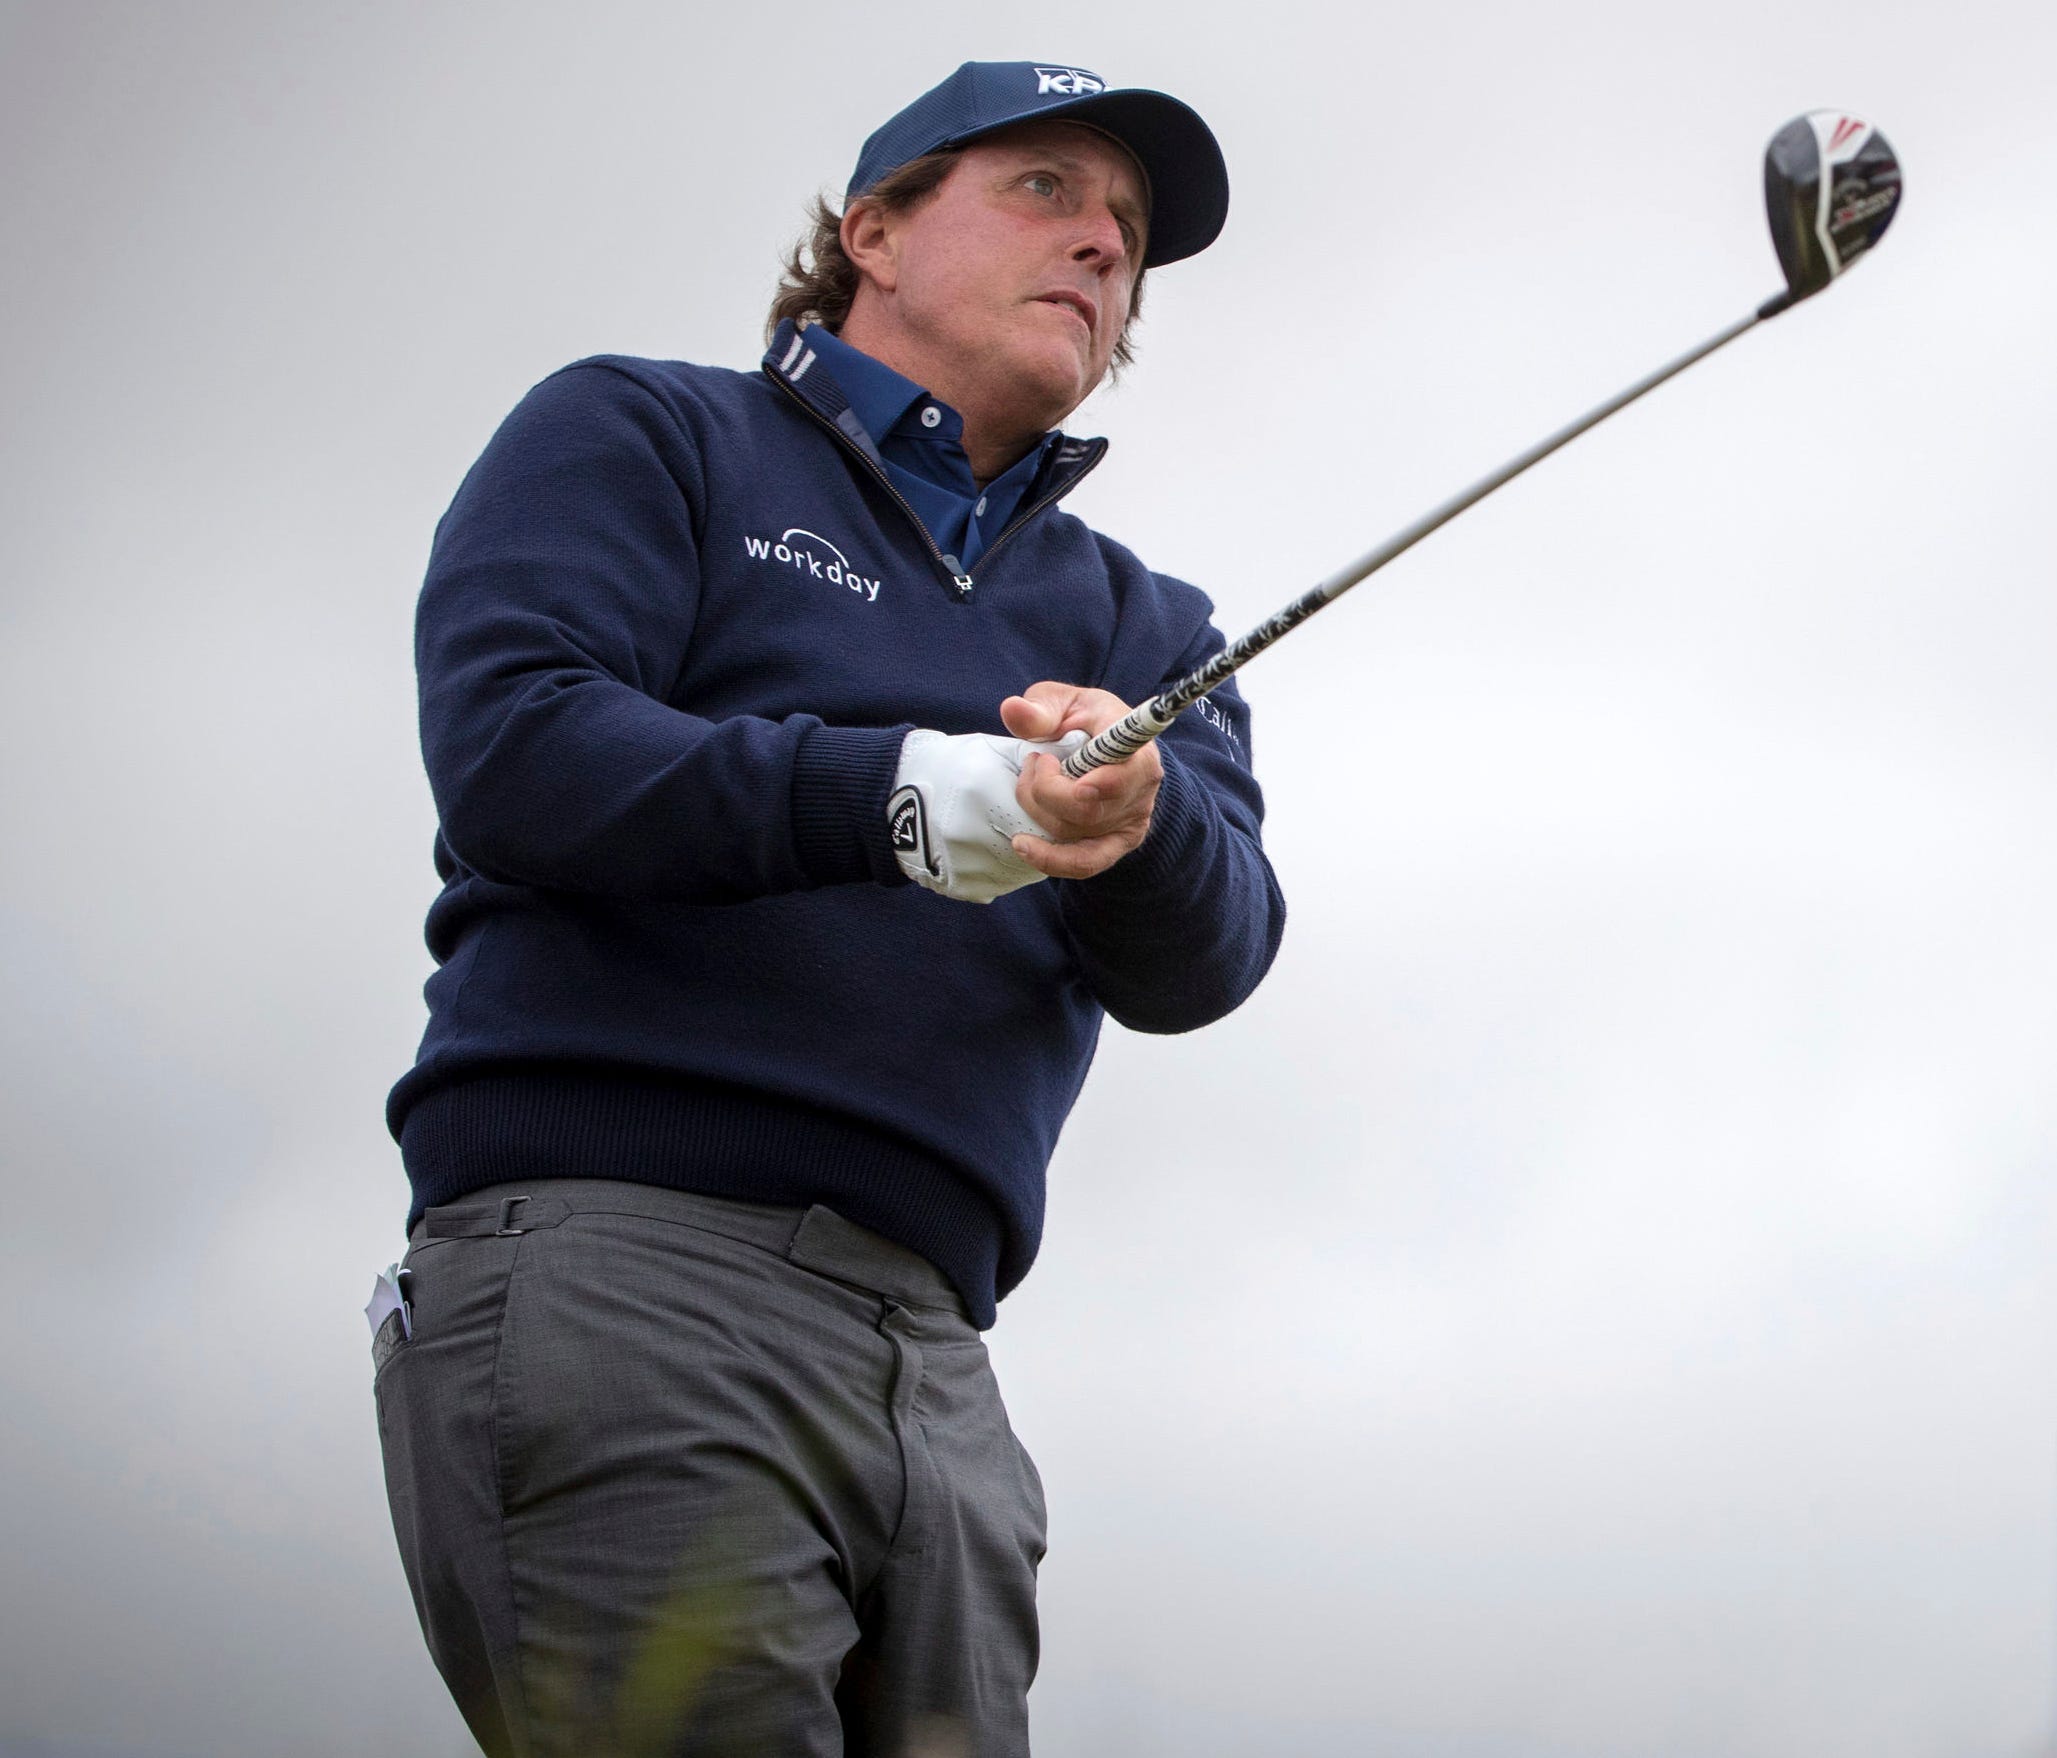 Phil Mickelson tees off at the 2nd, during day one of the Scottish Open golf tournament at Gullane Golf Club, East Lothian, Scotland, Thursday July 12, 2018.  Mickelson said Thursday, he wishes he could take back the moment when he swatted a moving g